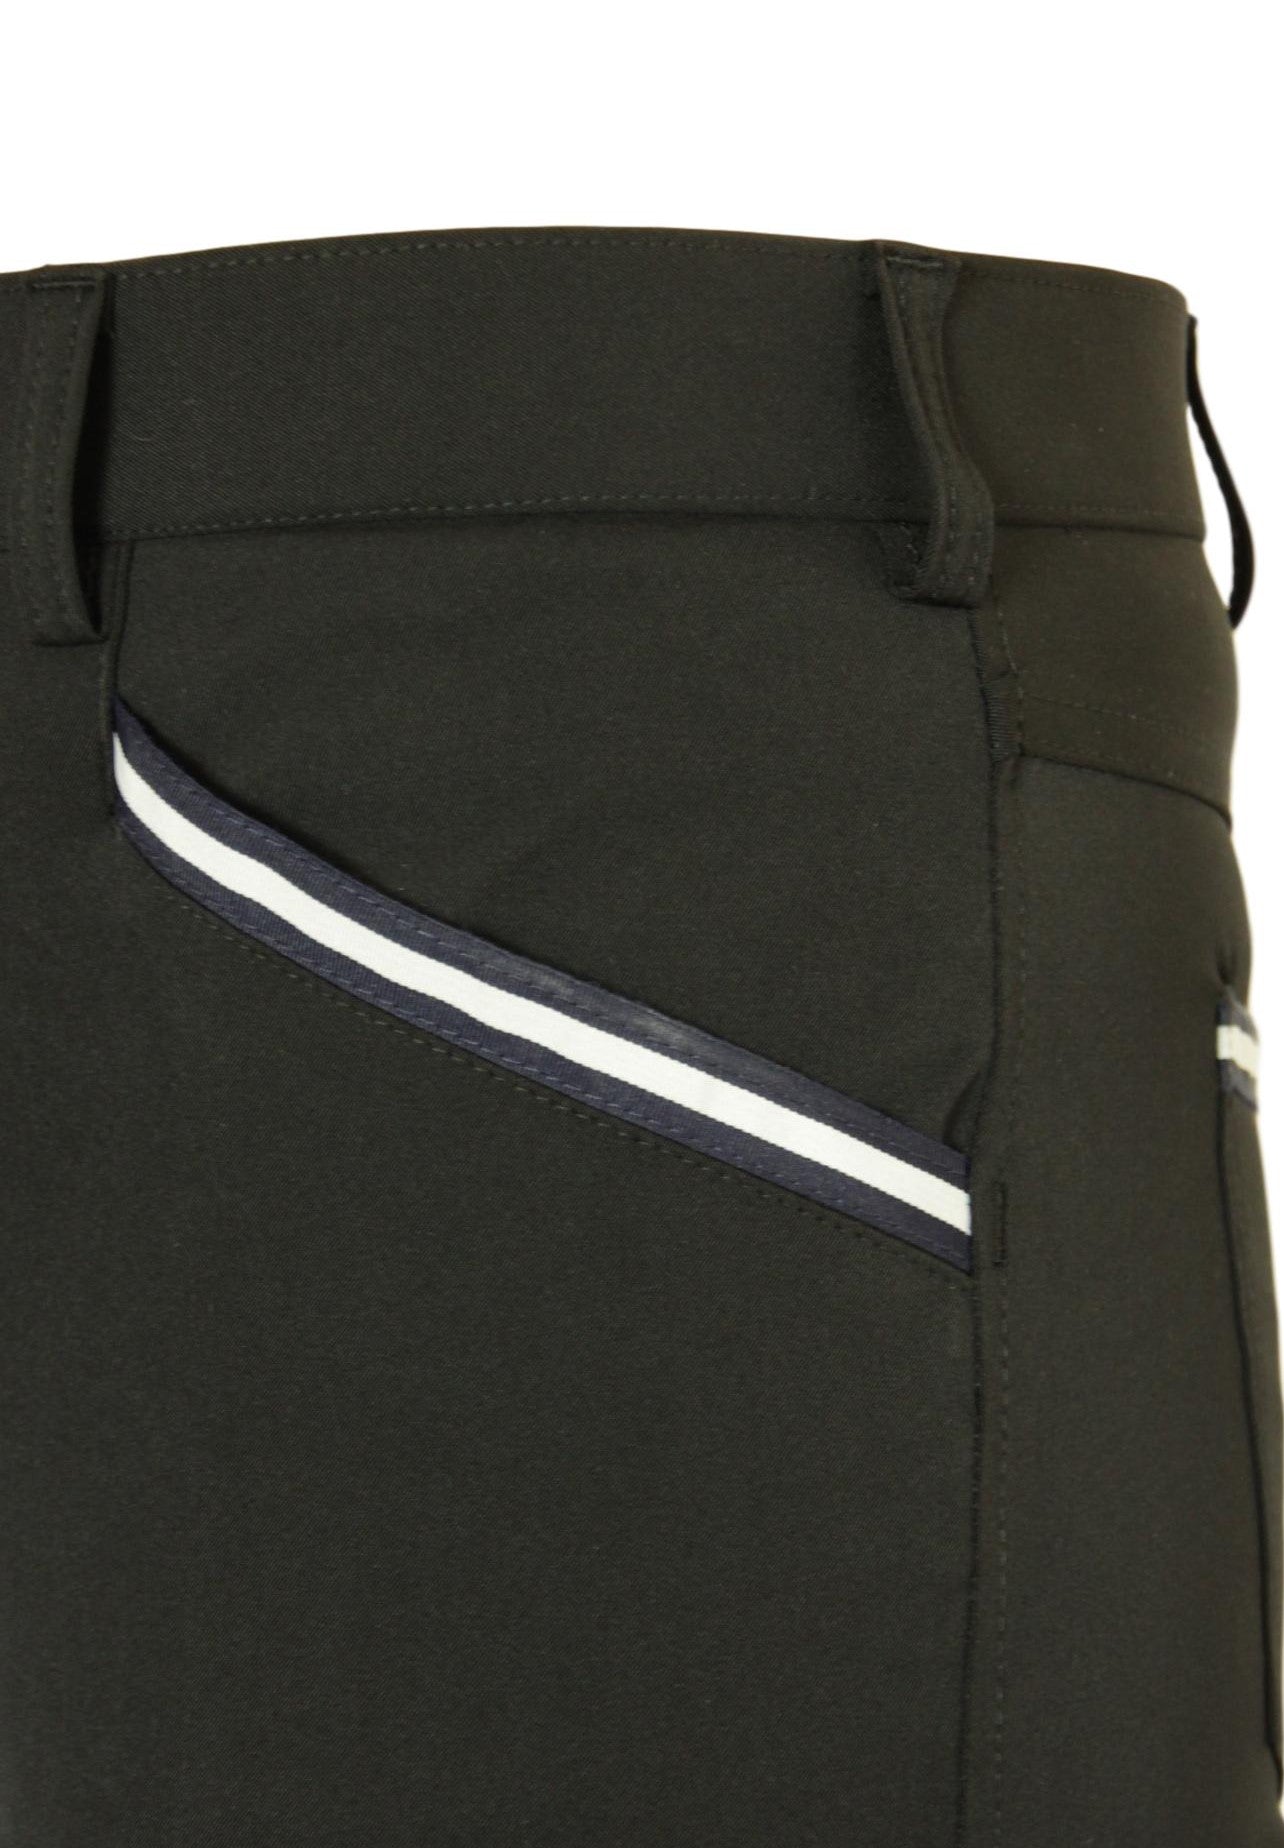 CoolMax Jodhpurs in sizes 6 to 28, in Black with Silicone seat grip-Plum Tack-The Equestrian